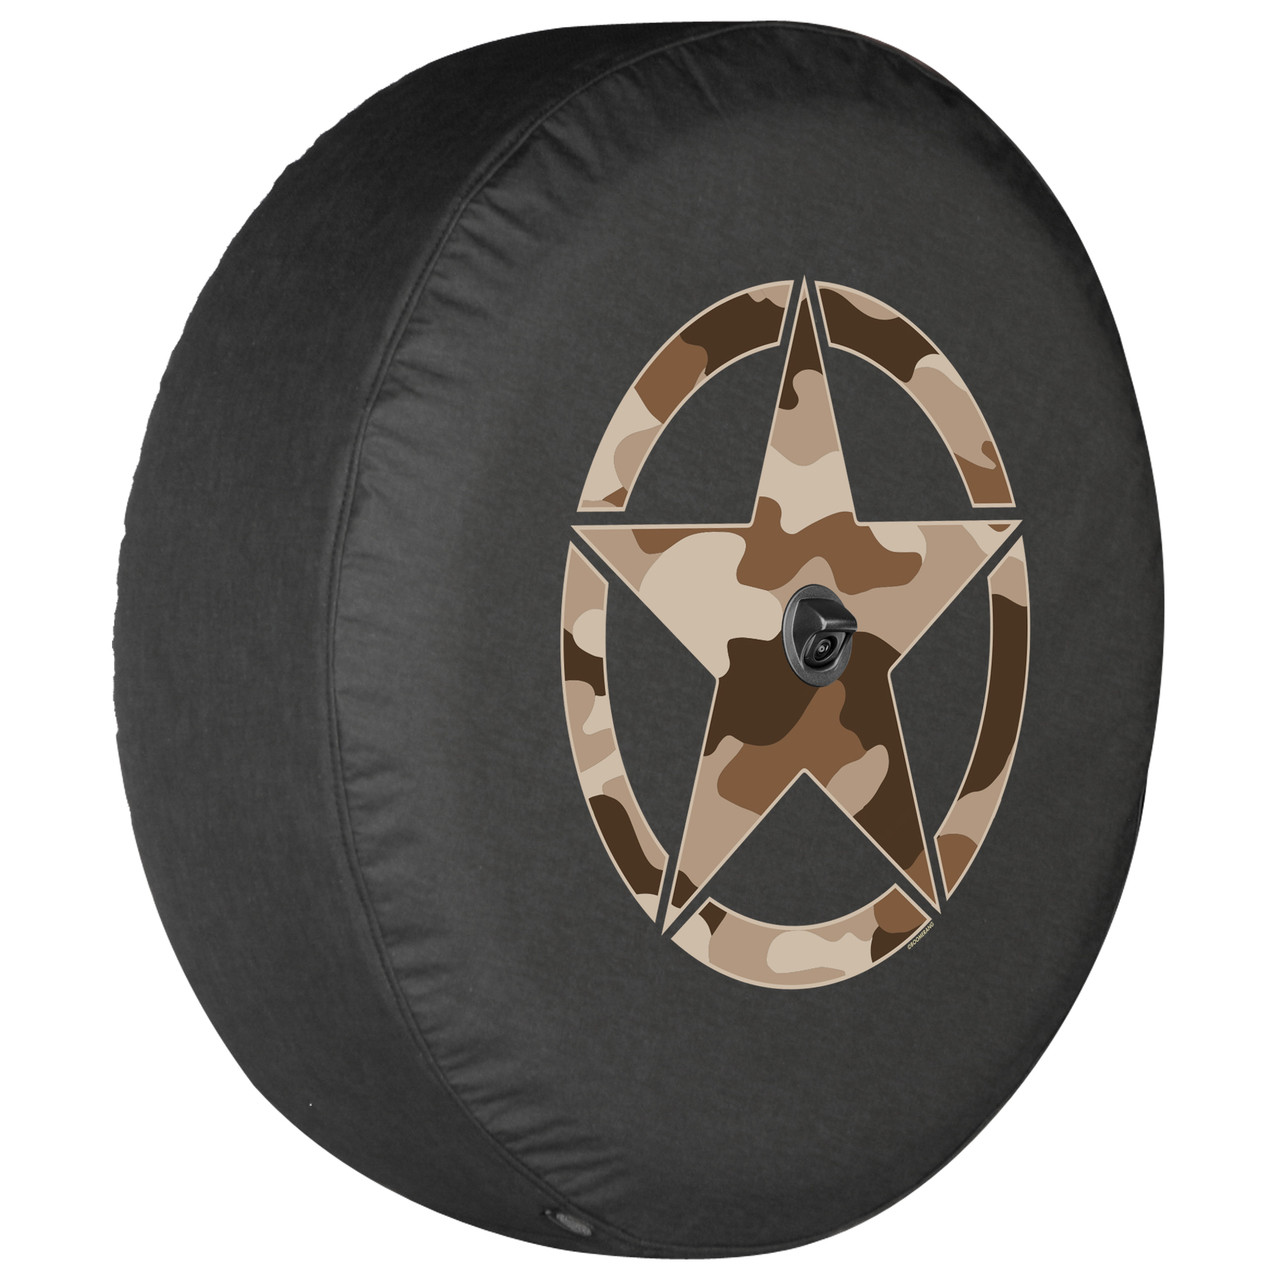 Jeep Spare Tire Cover Size Chart